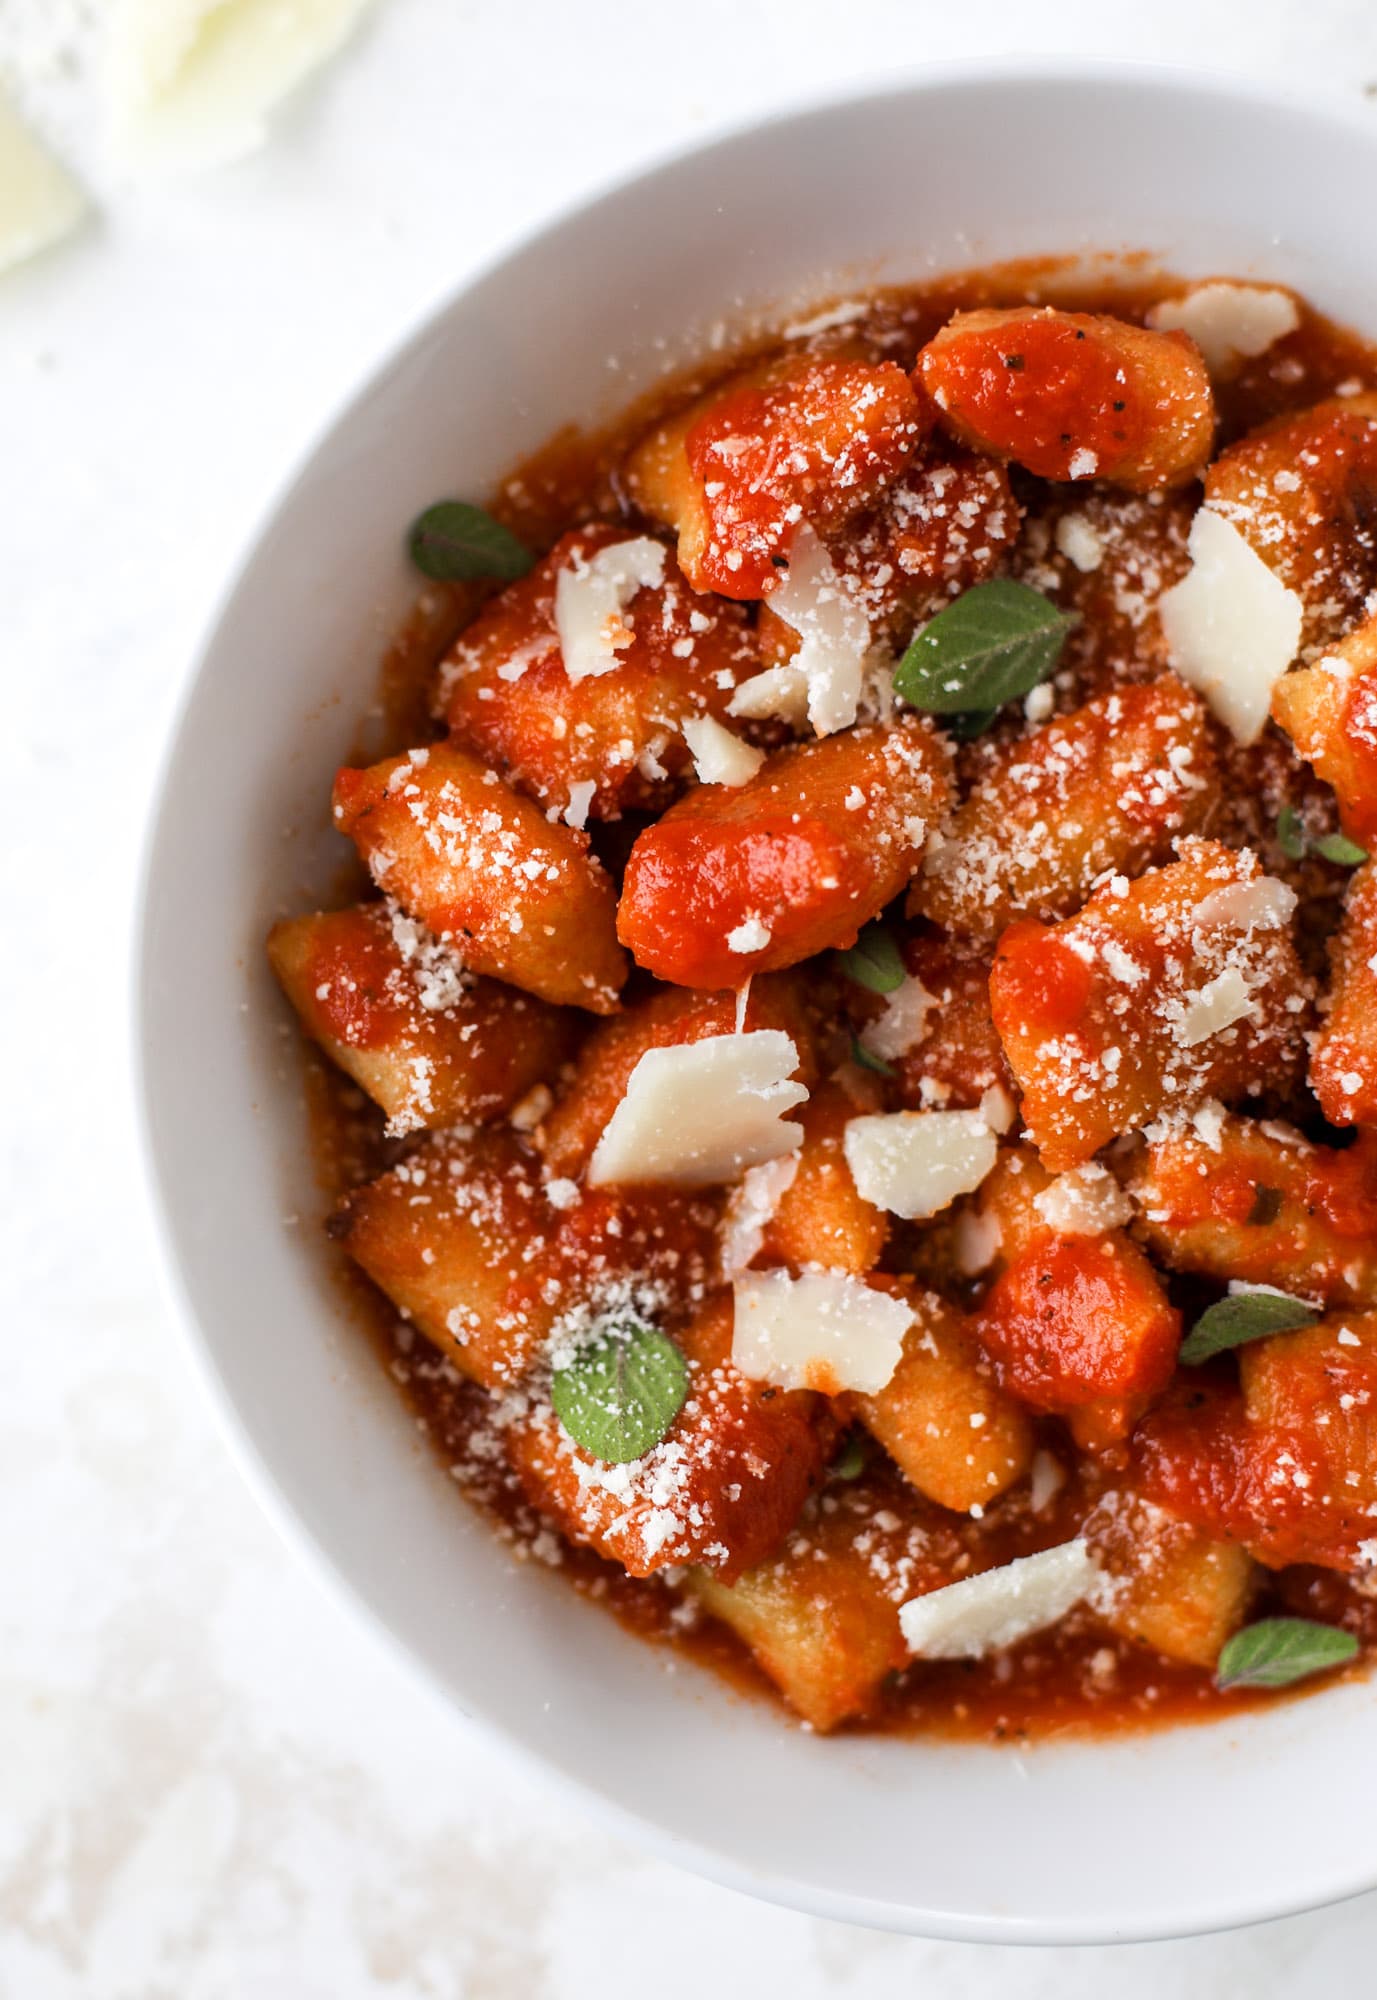 Homemade cauliflower gnocchi that tastes just like the Trader Joe's version! It's made with cauliflower, comes together fast and is super easy! I howsweeteats.com #cauliflower #gnocchi